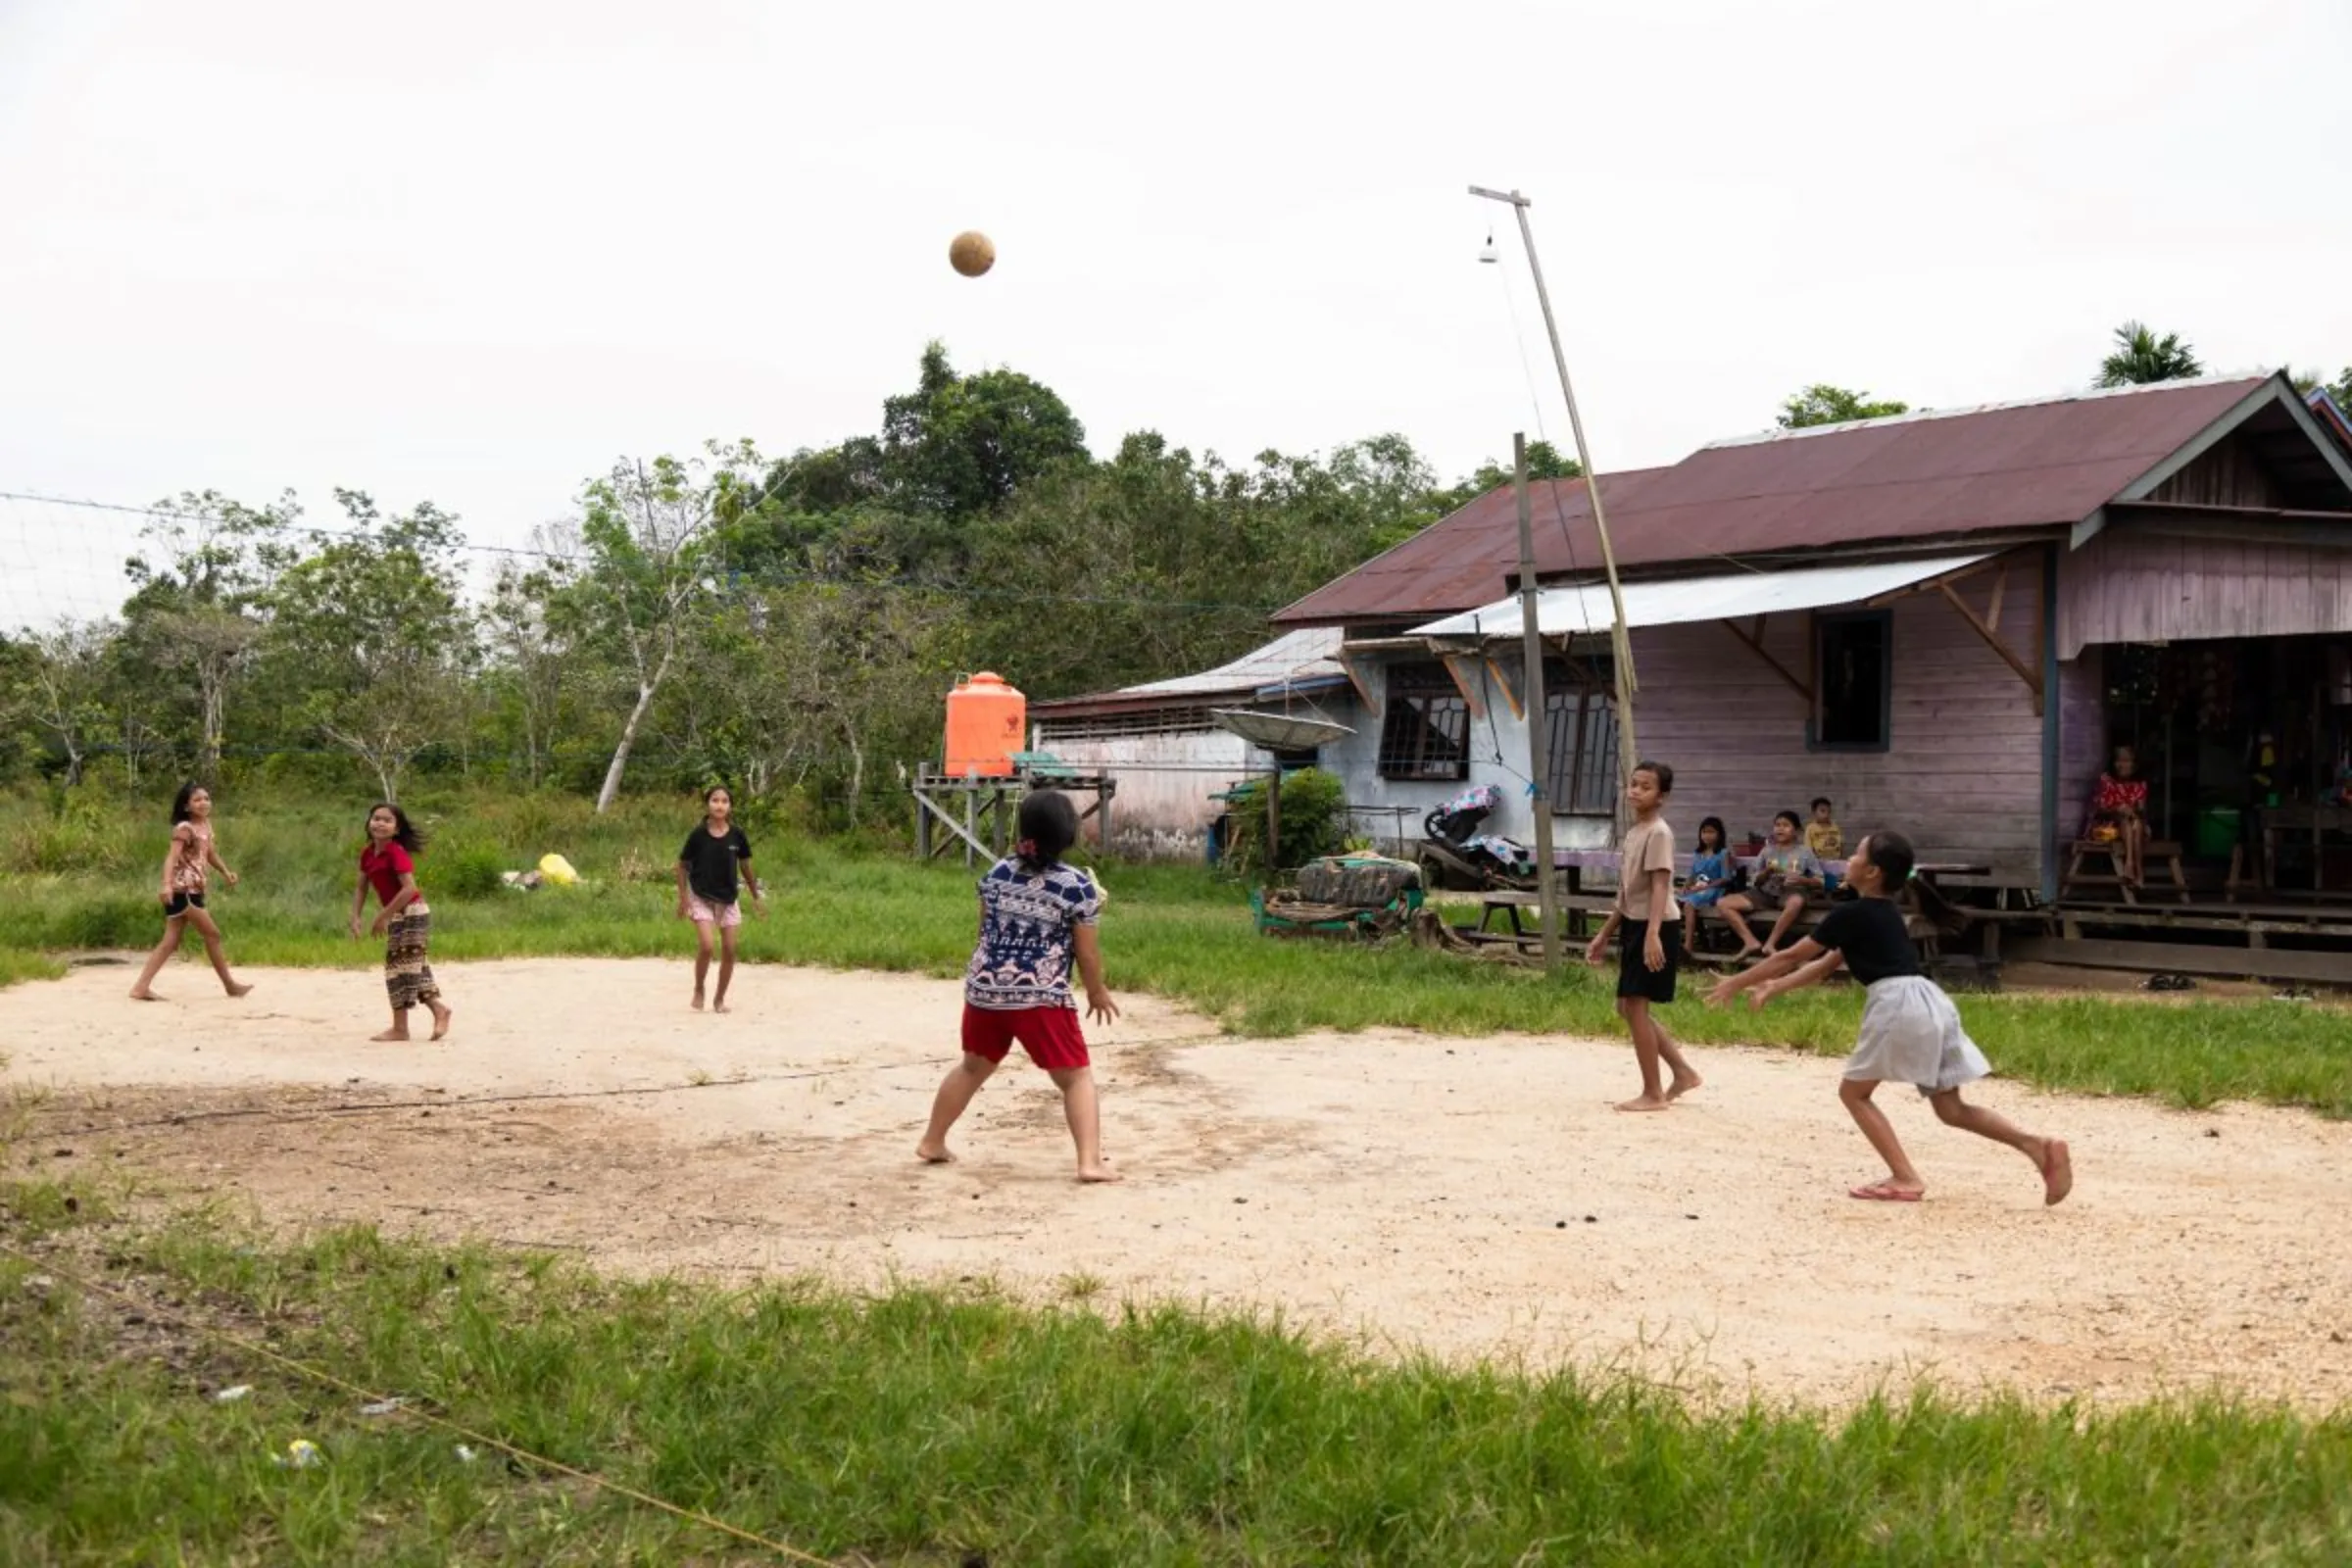 A group of children play volleyball at Tawai Baru village in Central Kalimantan, Indonesia on June 20, 2023. This village has been frequently hit by floods since the forest area was cleared for the food security program. Thomson Reuters Foundation/Irene Barlian